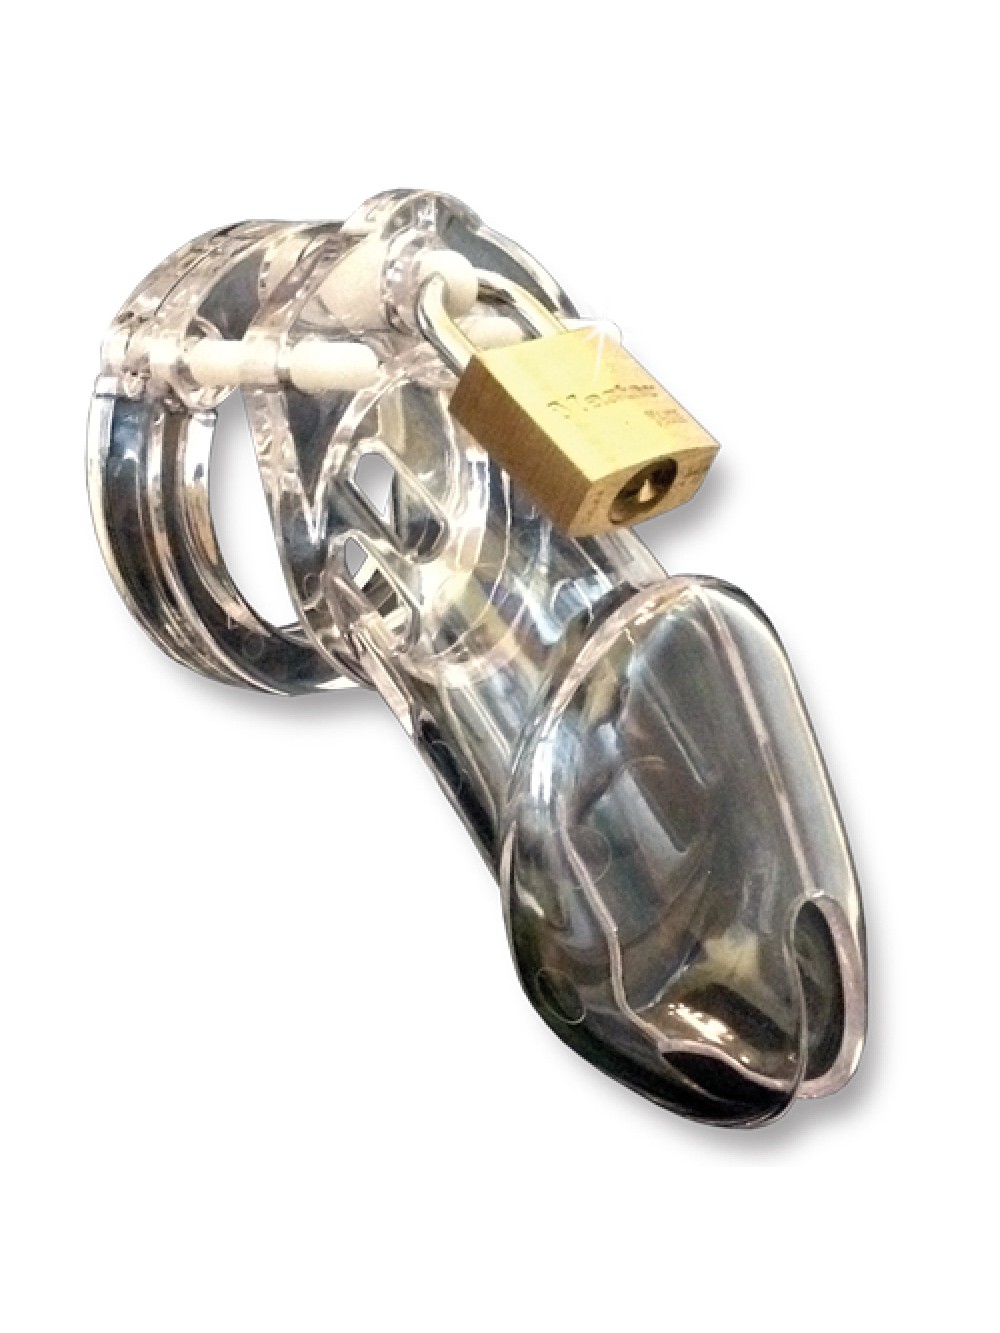 CB-6000 Chastity Cage - Clear - 37 mm